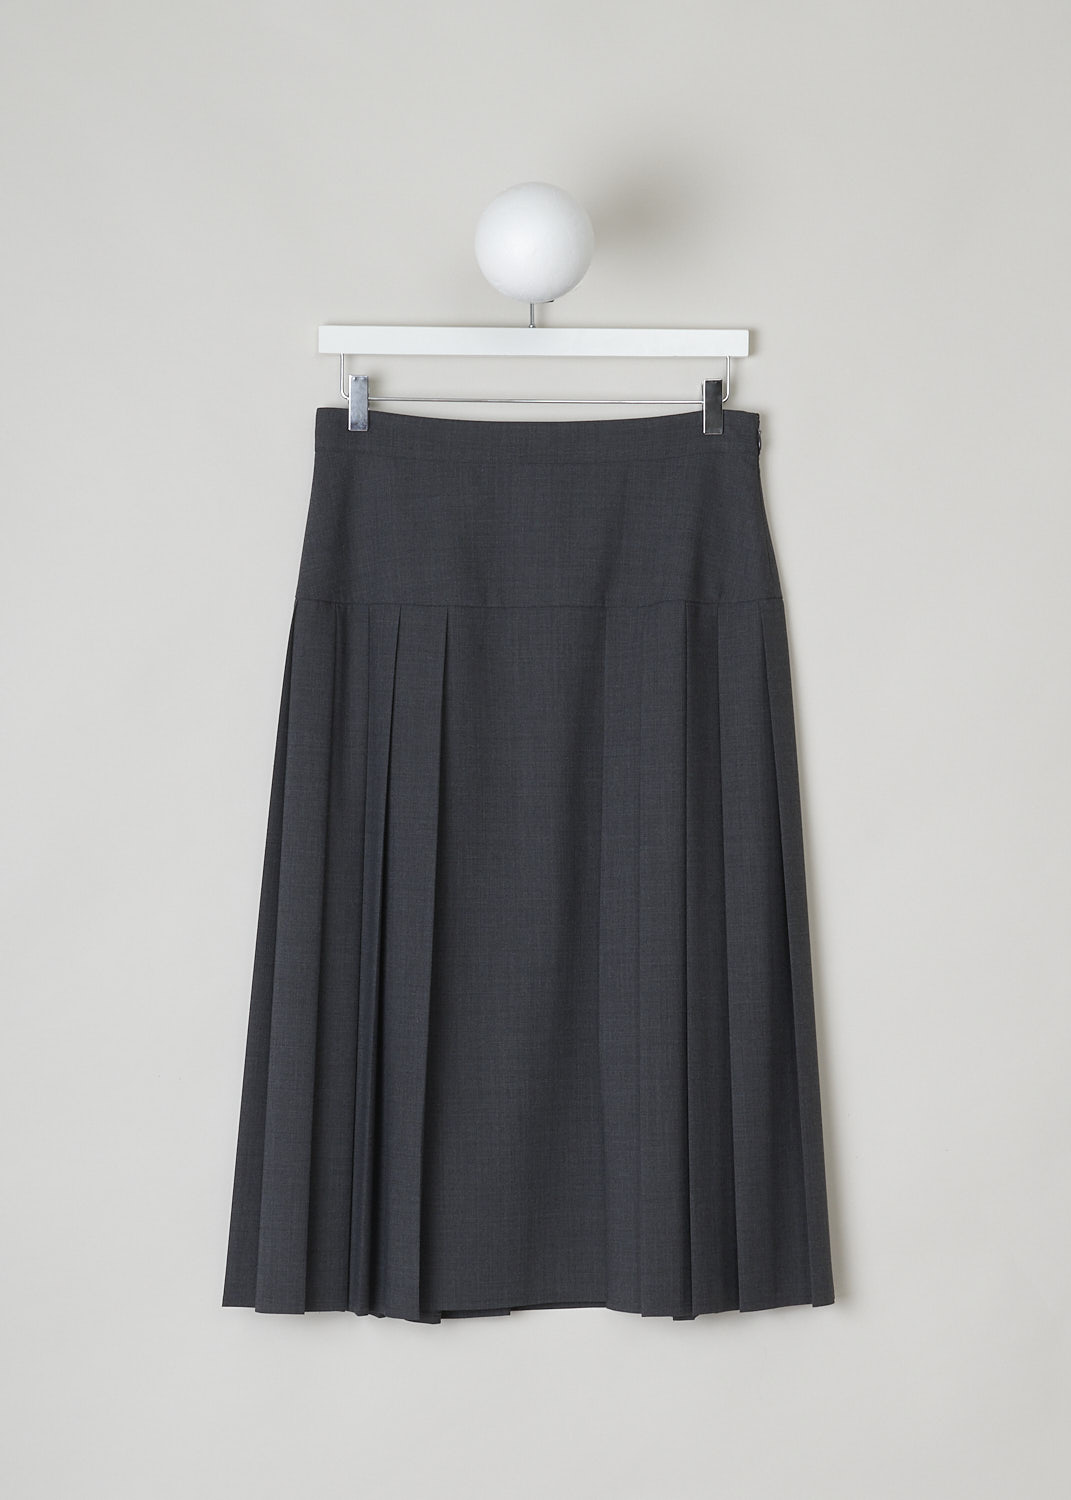 ASPESI, GREY PLEATED MIDI SKIRT, 2207_G286_01197, Grey, Front, This grey wool-blend midi skirt has a broad waistband and pleats along the sides. The skirt has a straight hemline. A concealed zipper in the side seam functions as the closure option. 
